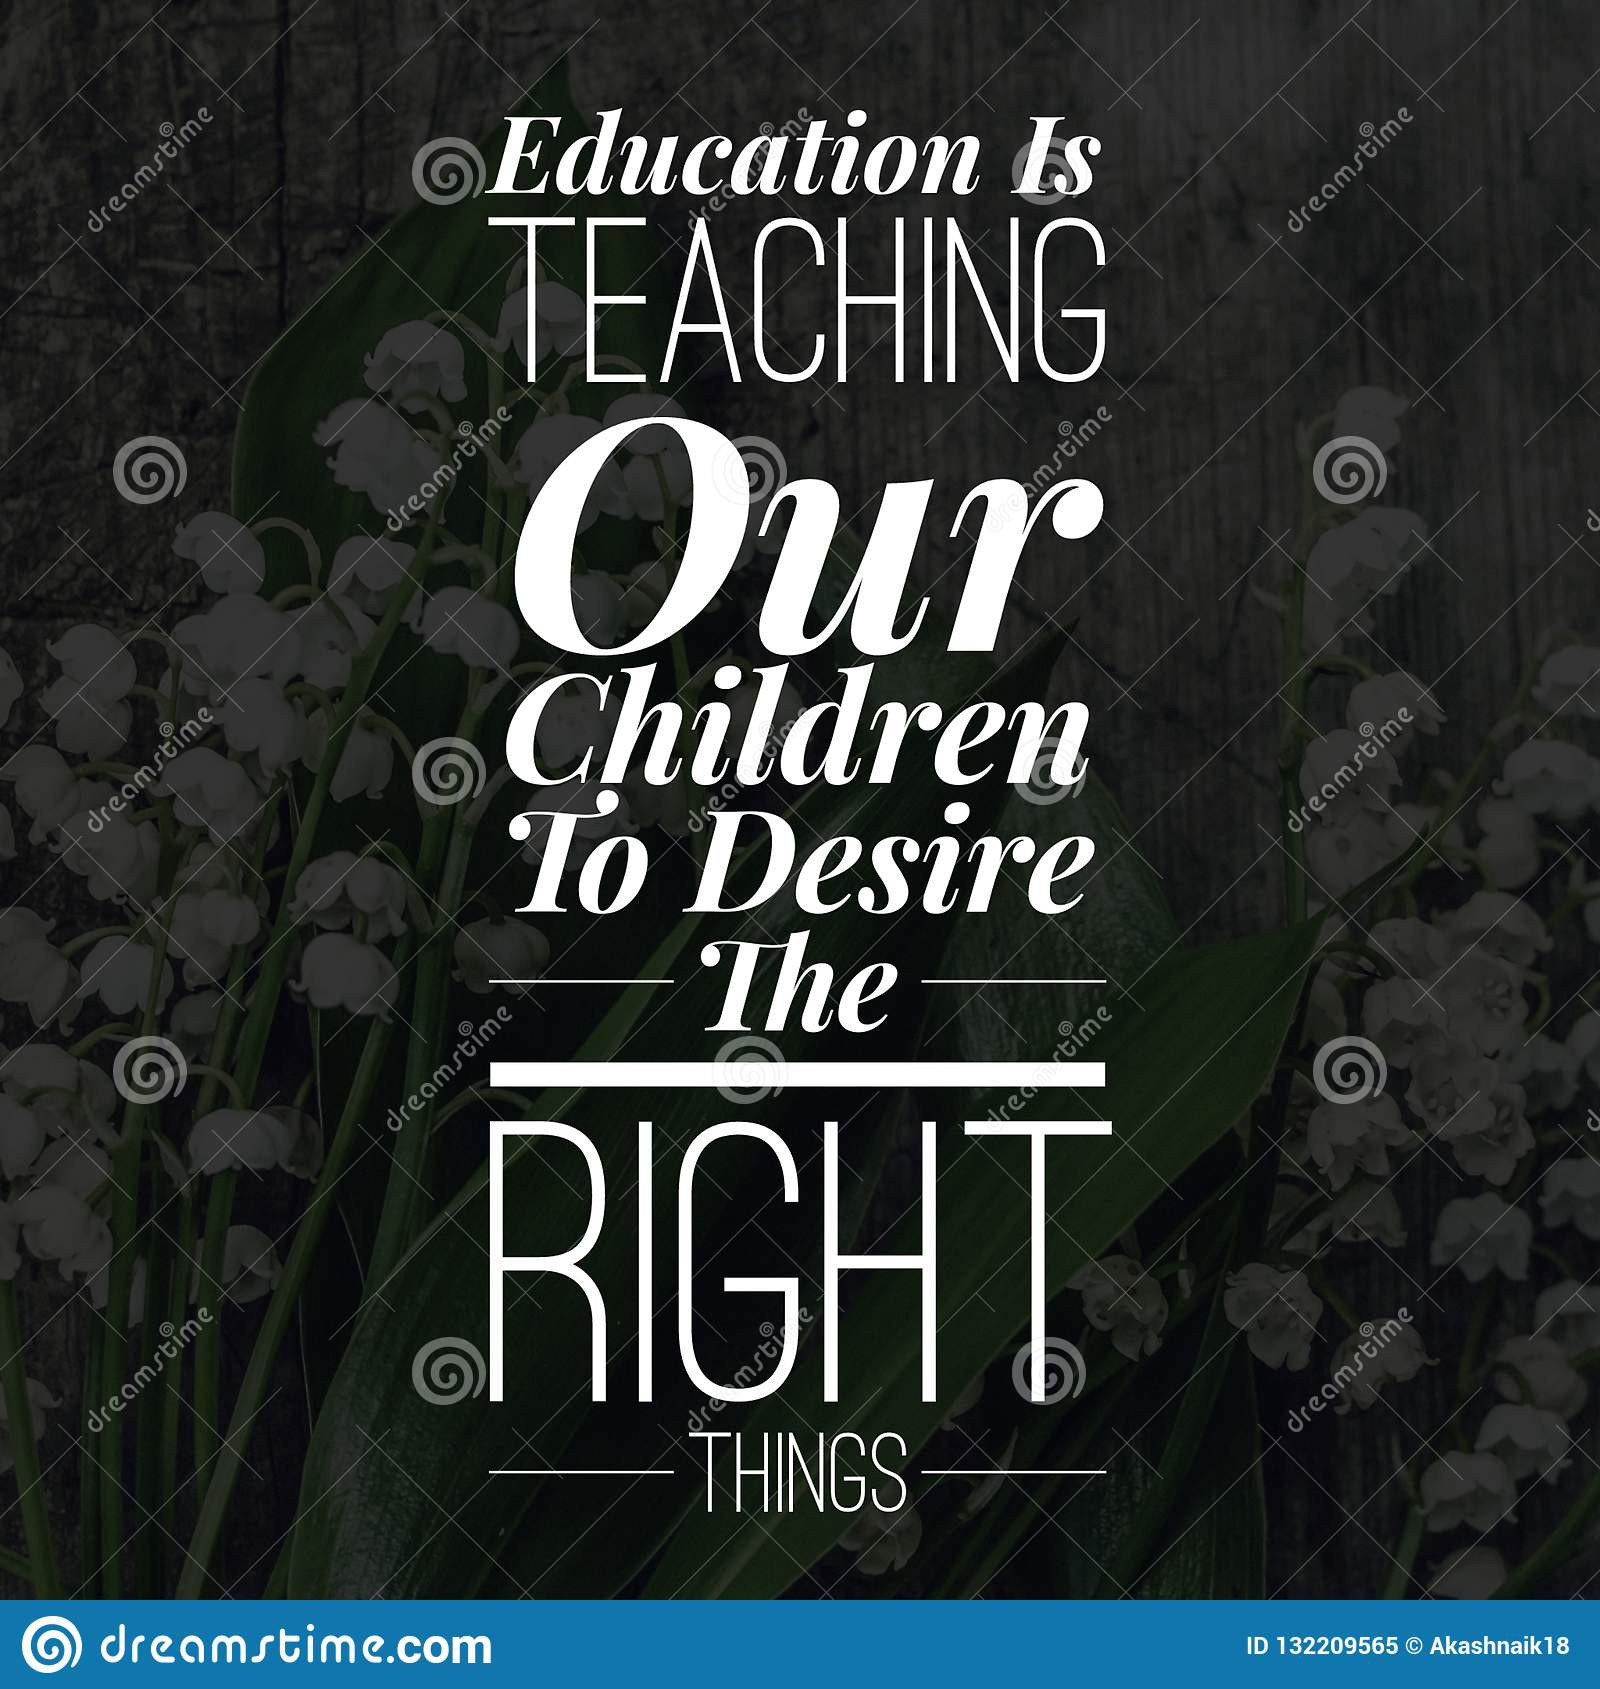 Positive Education Quotes
 Inspirational Quotes Education Is Teaching Our Children To